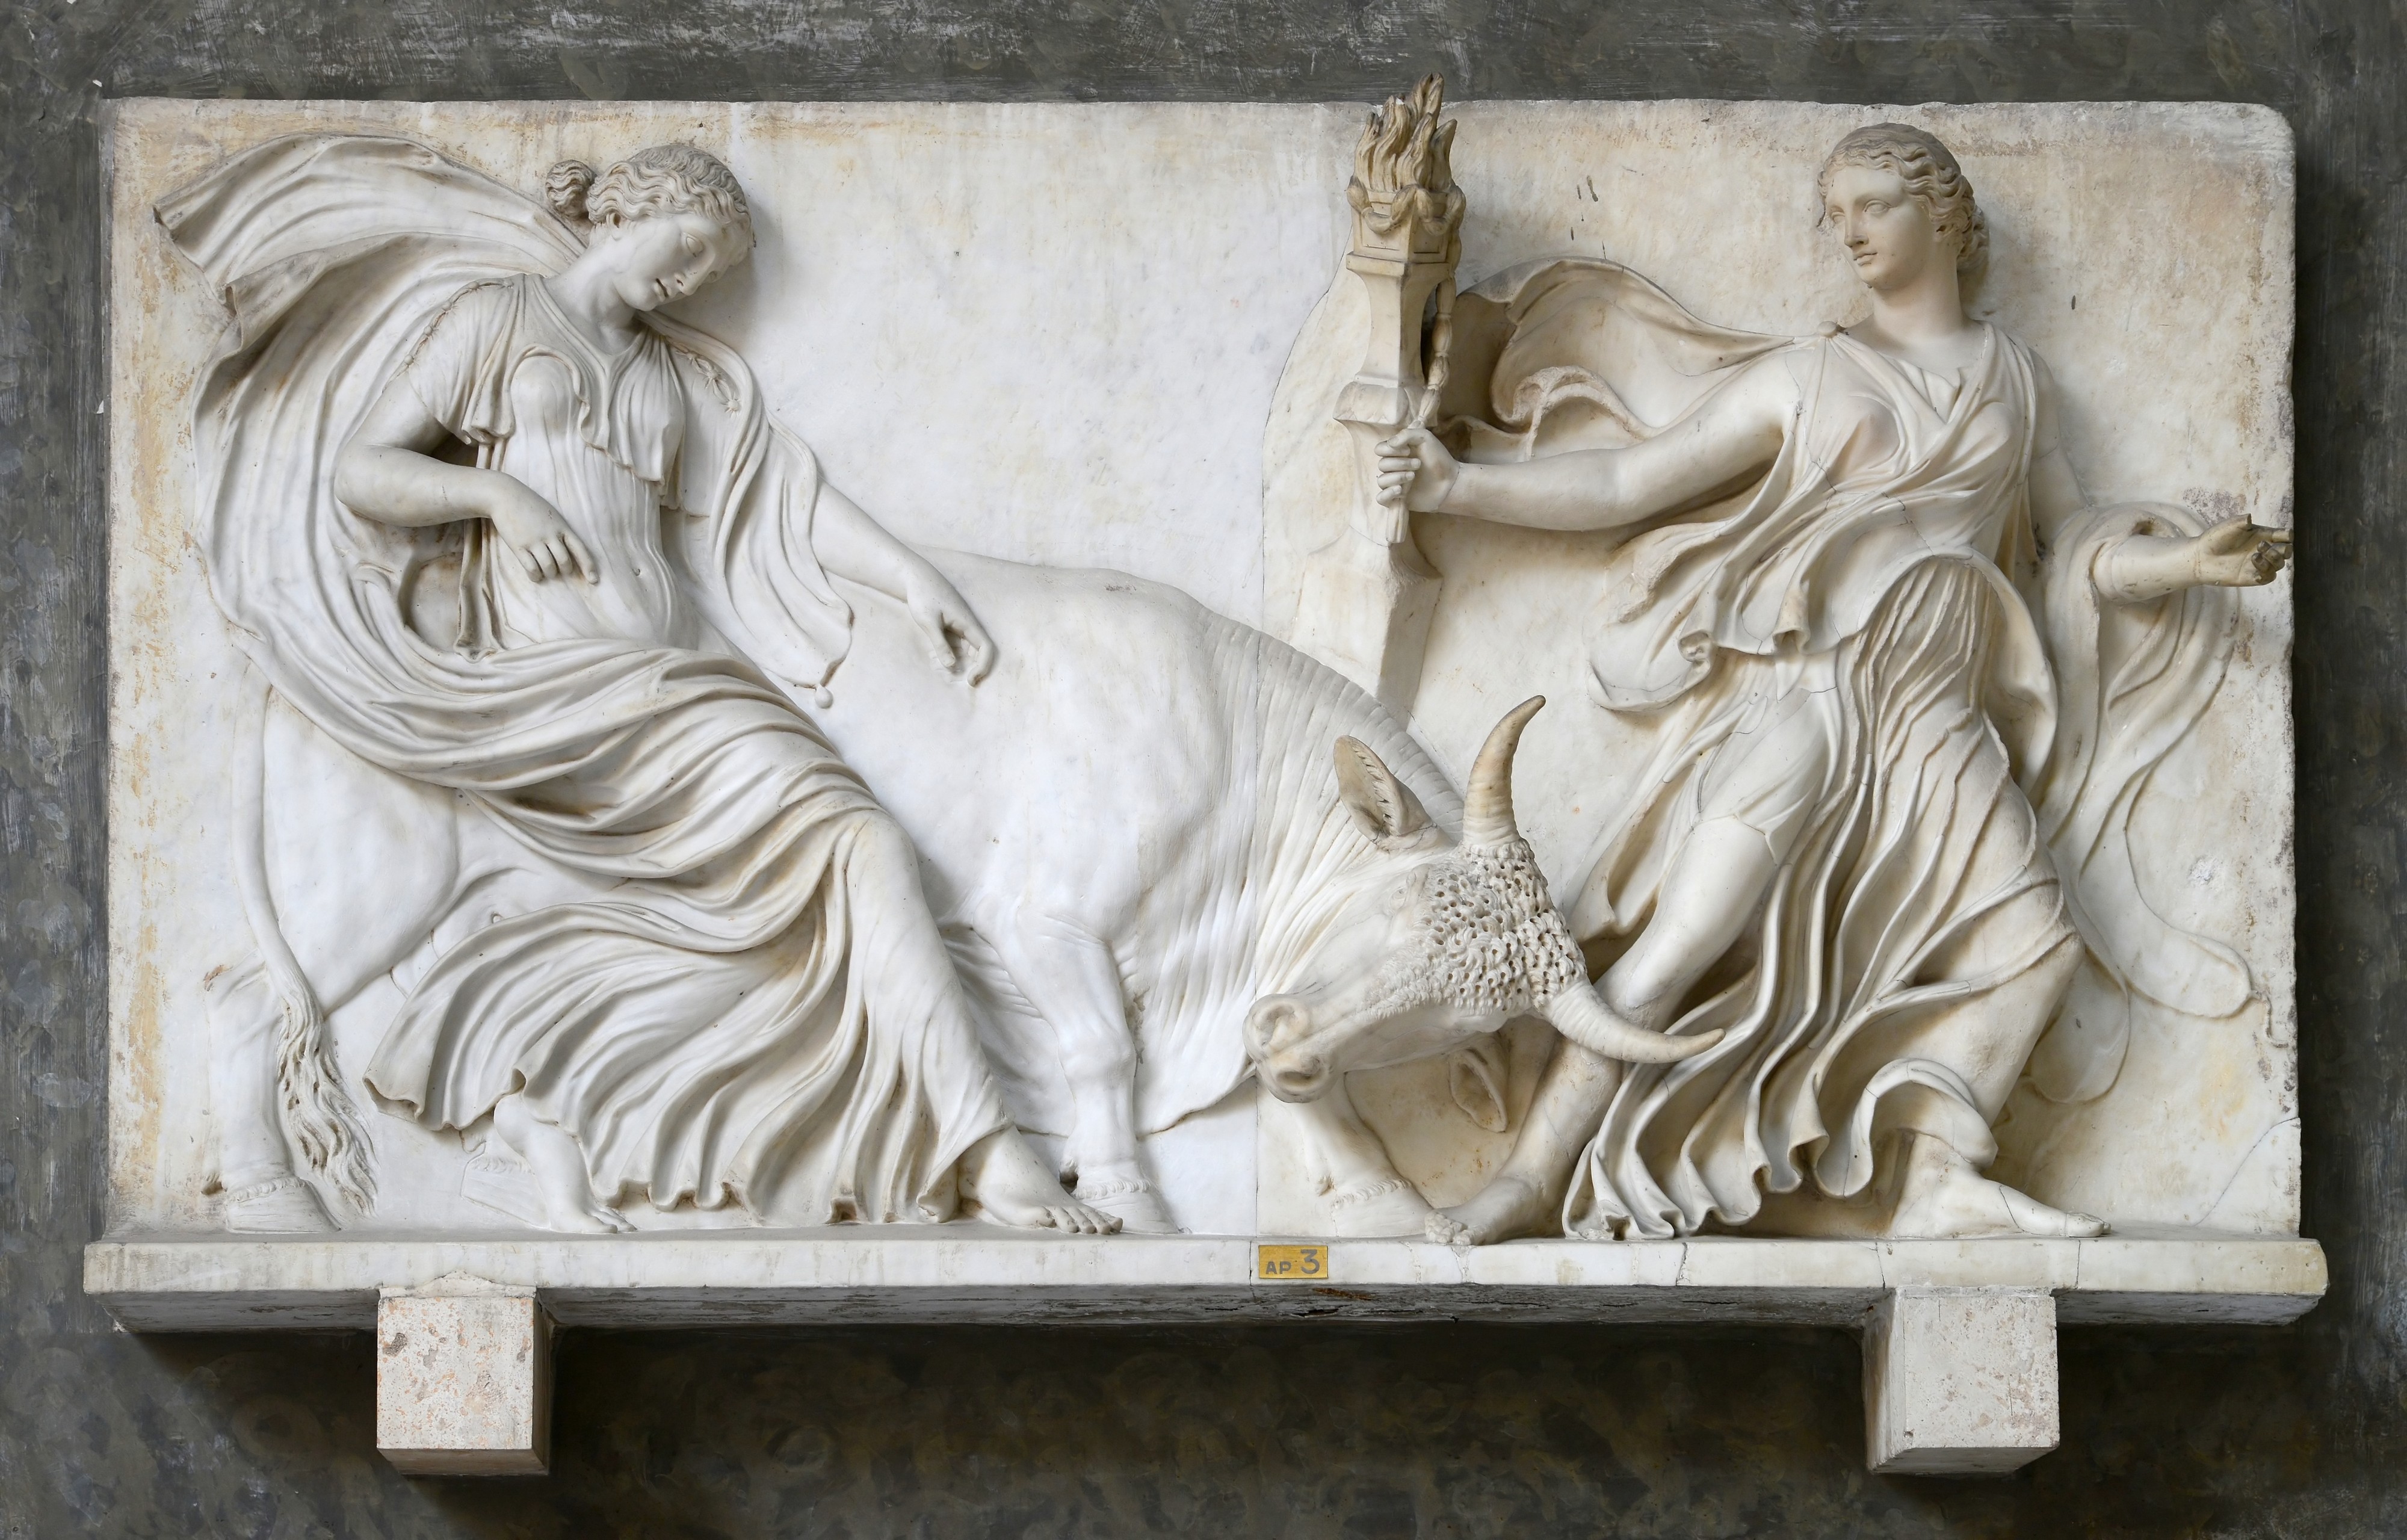 Two Bacchantes and a Bull (Vatican Museums) September 2015.1a